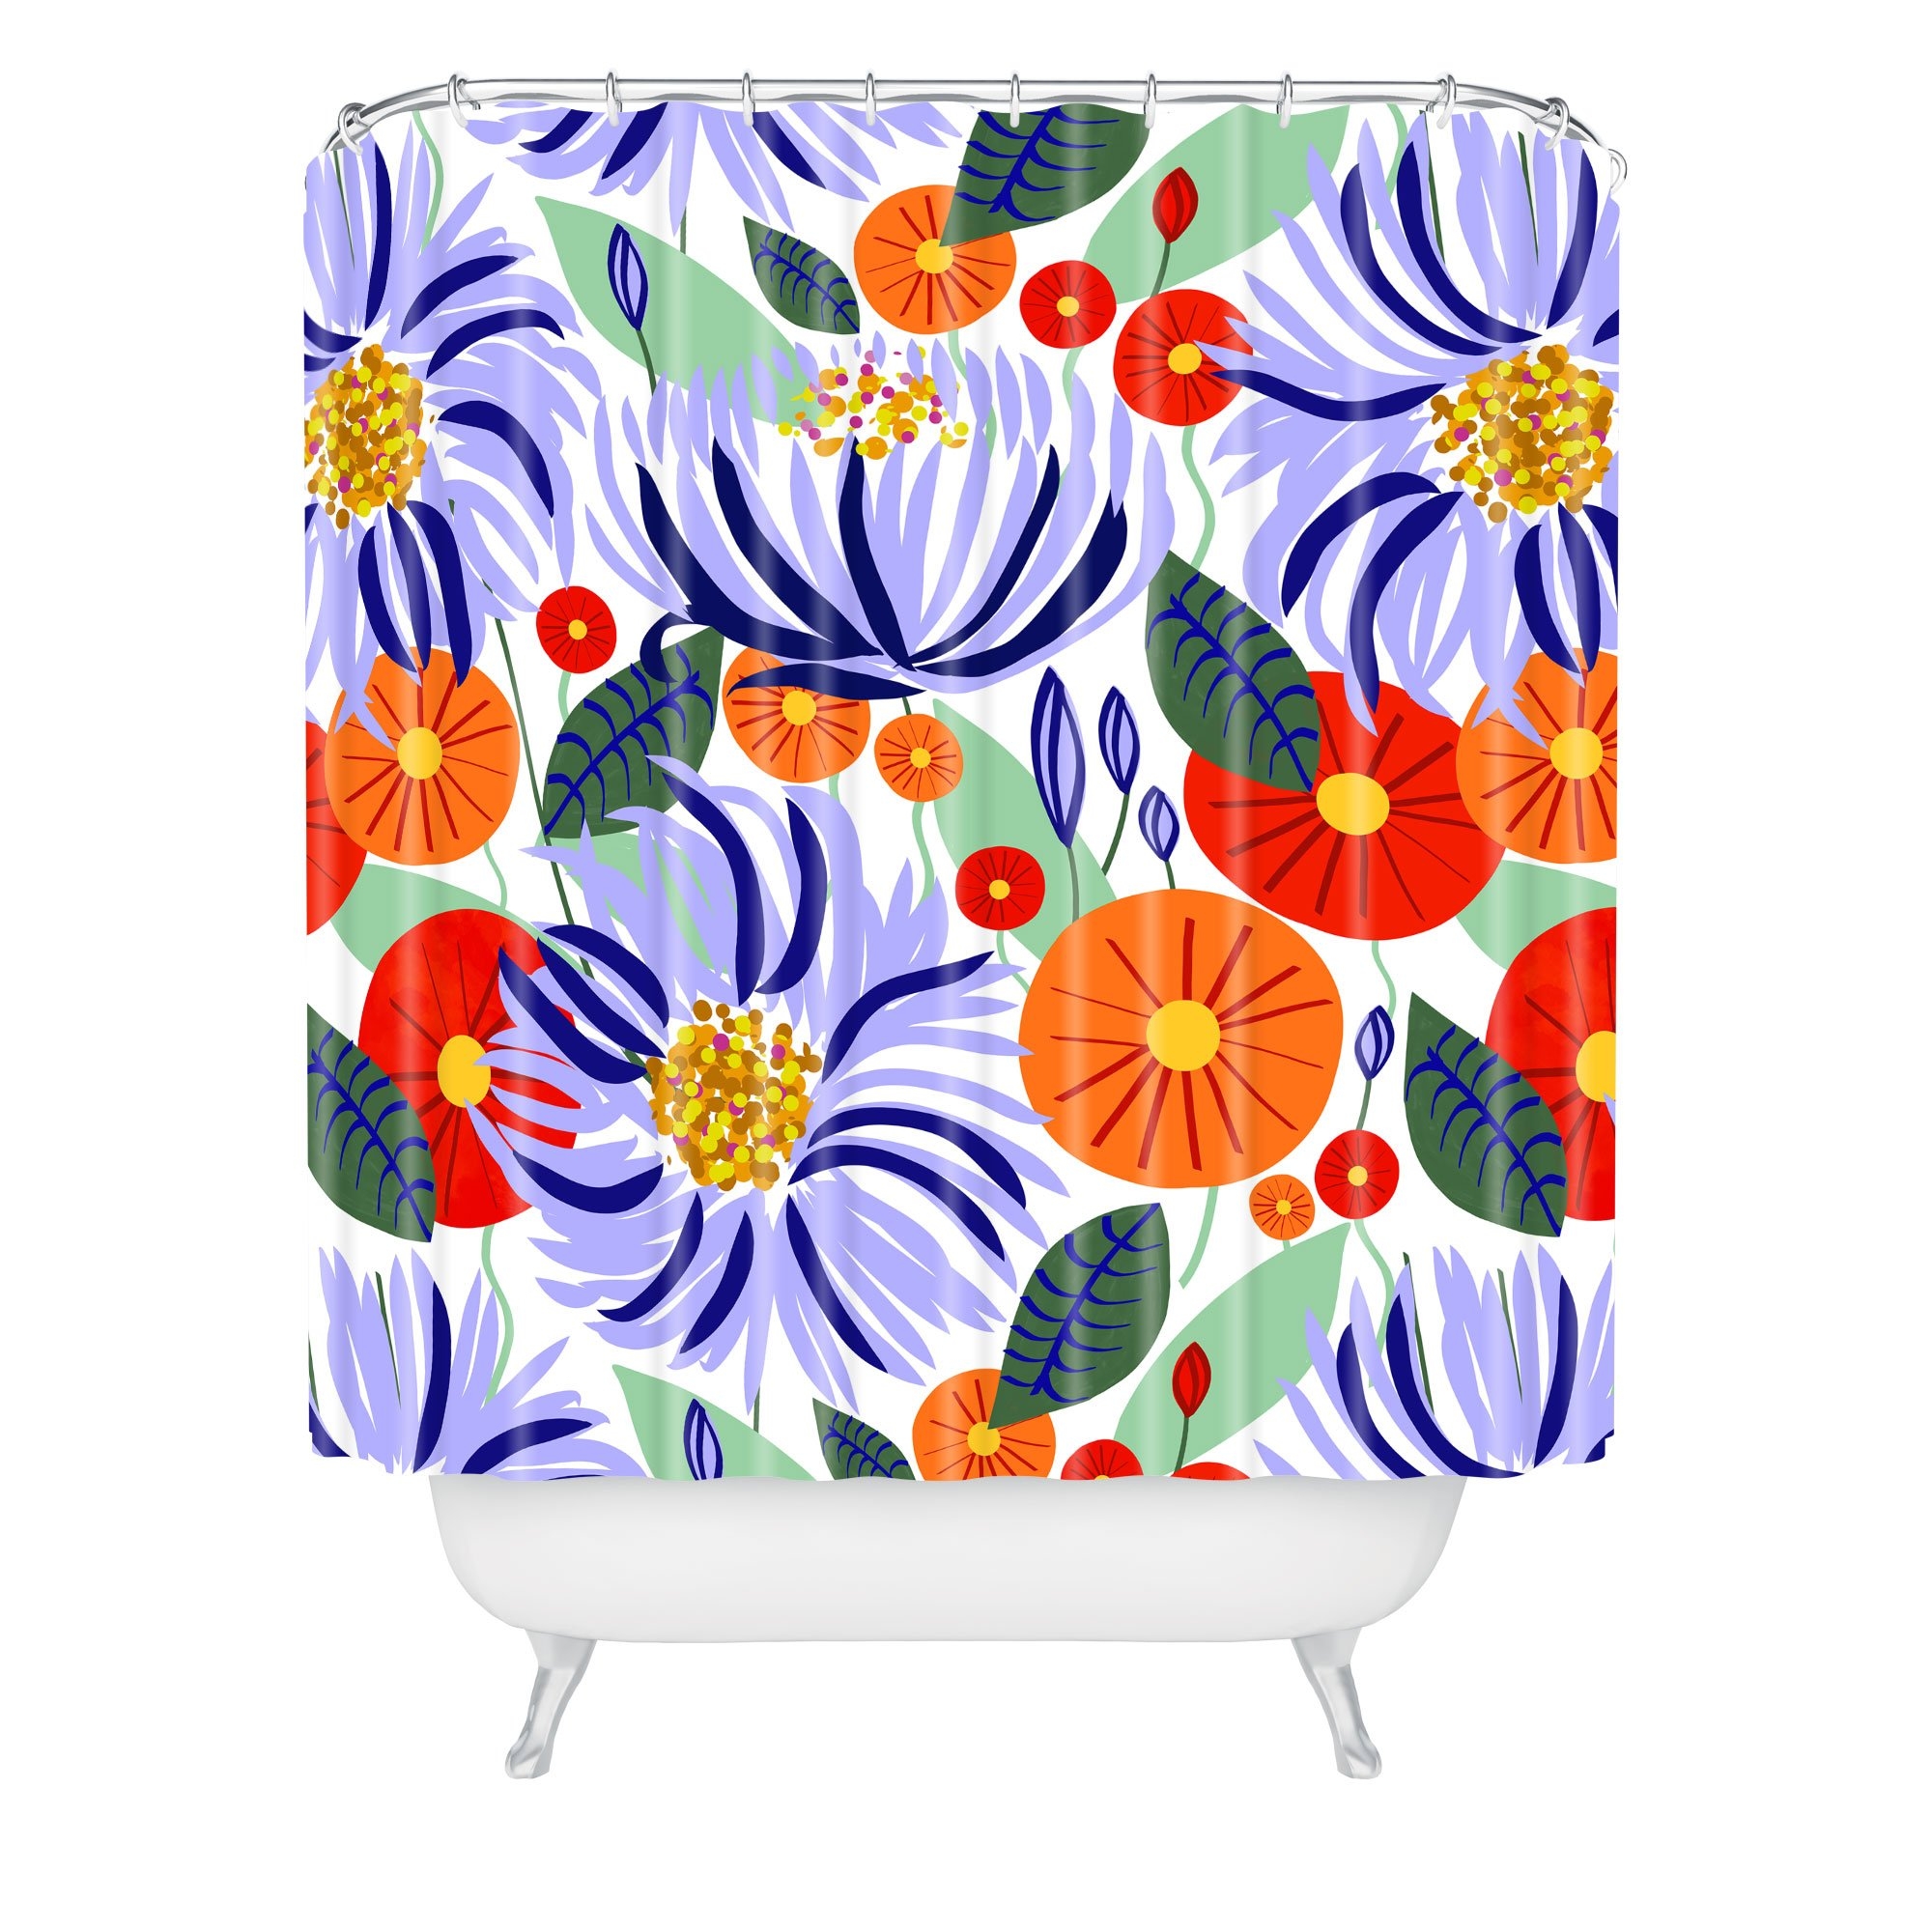 83 Oranges Alia Shower Curtain - Standard 71"x74" with Rings - Image 0